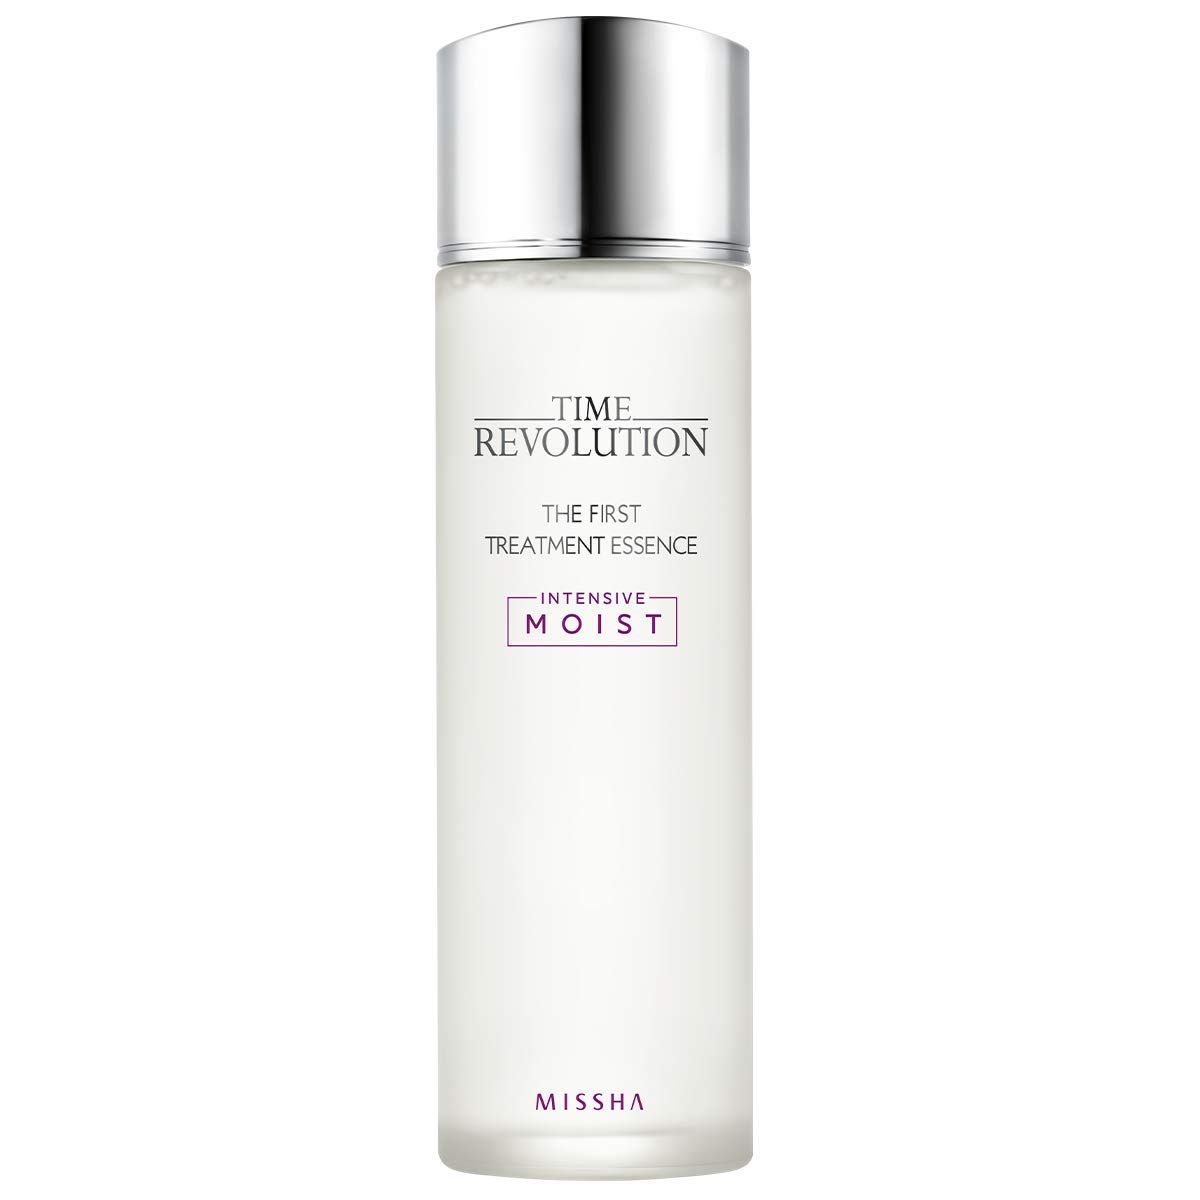 Missha Time Revolution The First Treatment Essence Intensive Moist - Kbeauty concentrated essence... | Amazon (US)